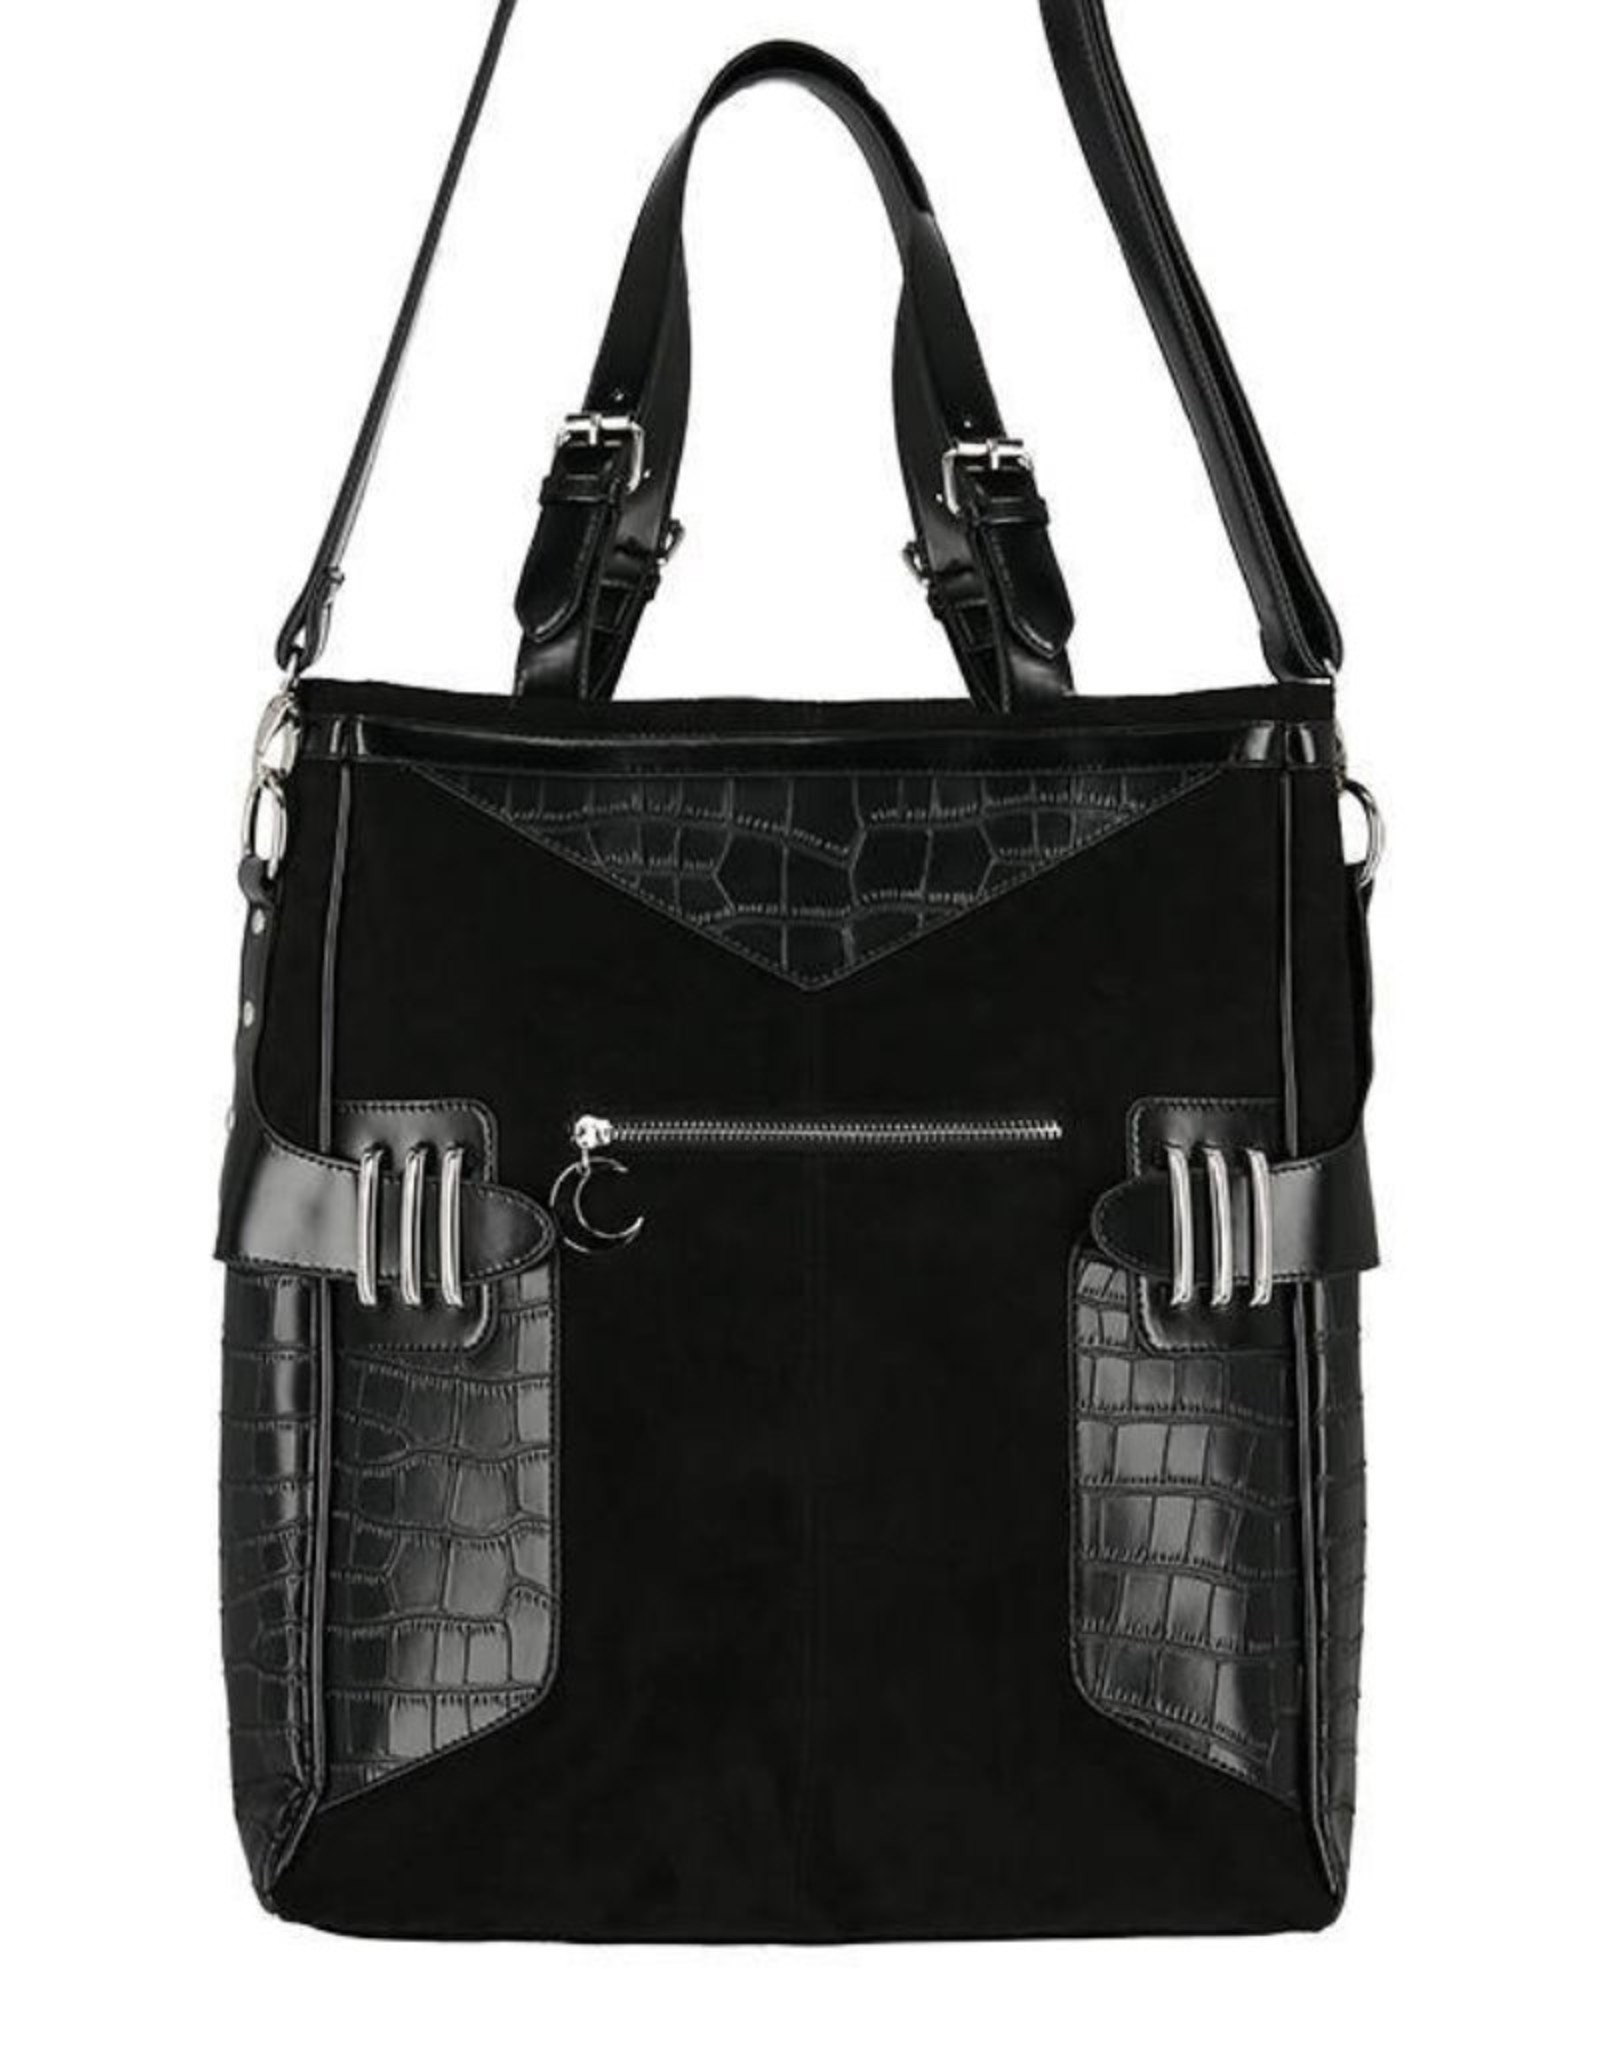 Restyle Gothic bags Steampunk bags - Layla Black Shopper bag with Harness and Crescent - Restyle